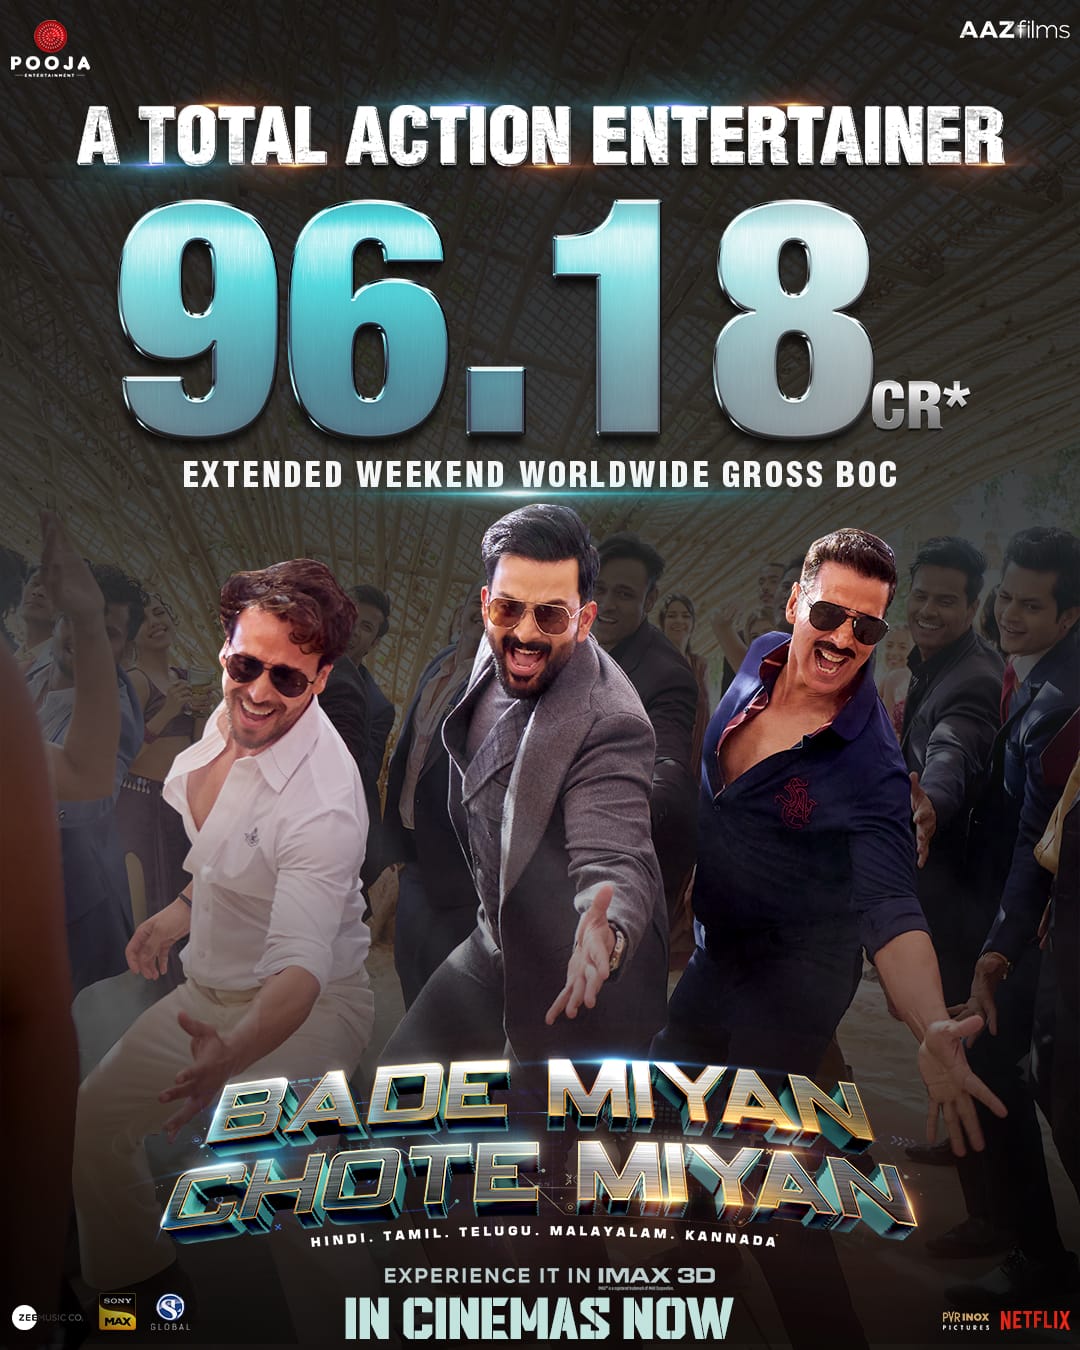 Bade Miyan Chote Miyan inches closer to the 100 crore club, the Pooja Entertainment production starring Akshay Kumar and Tiger Shroff earns Rs 96.18 worldwide gross on extended opening weekend